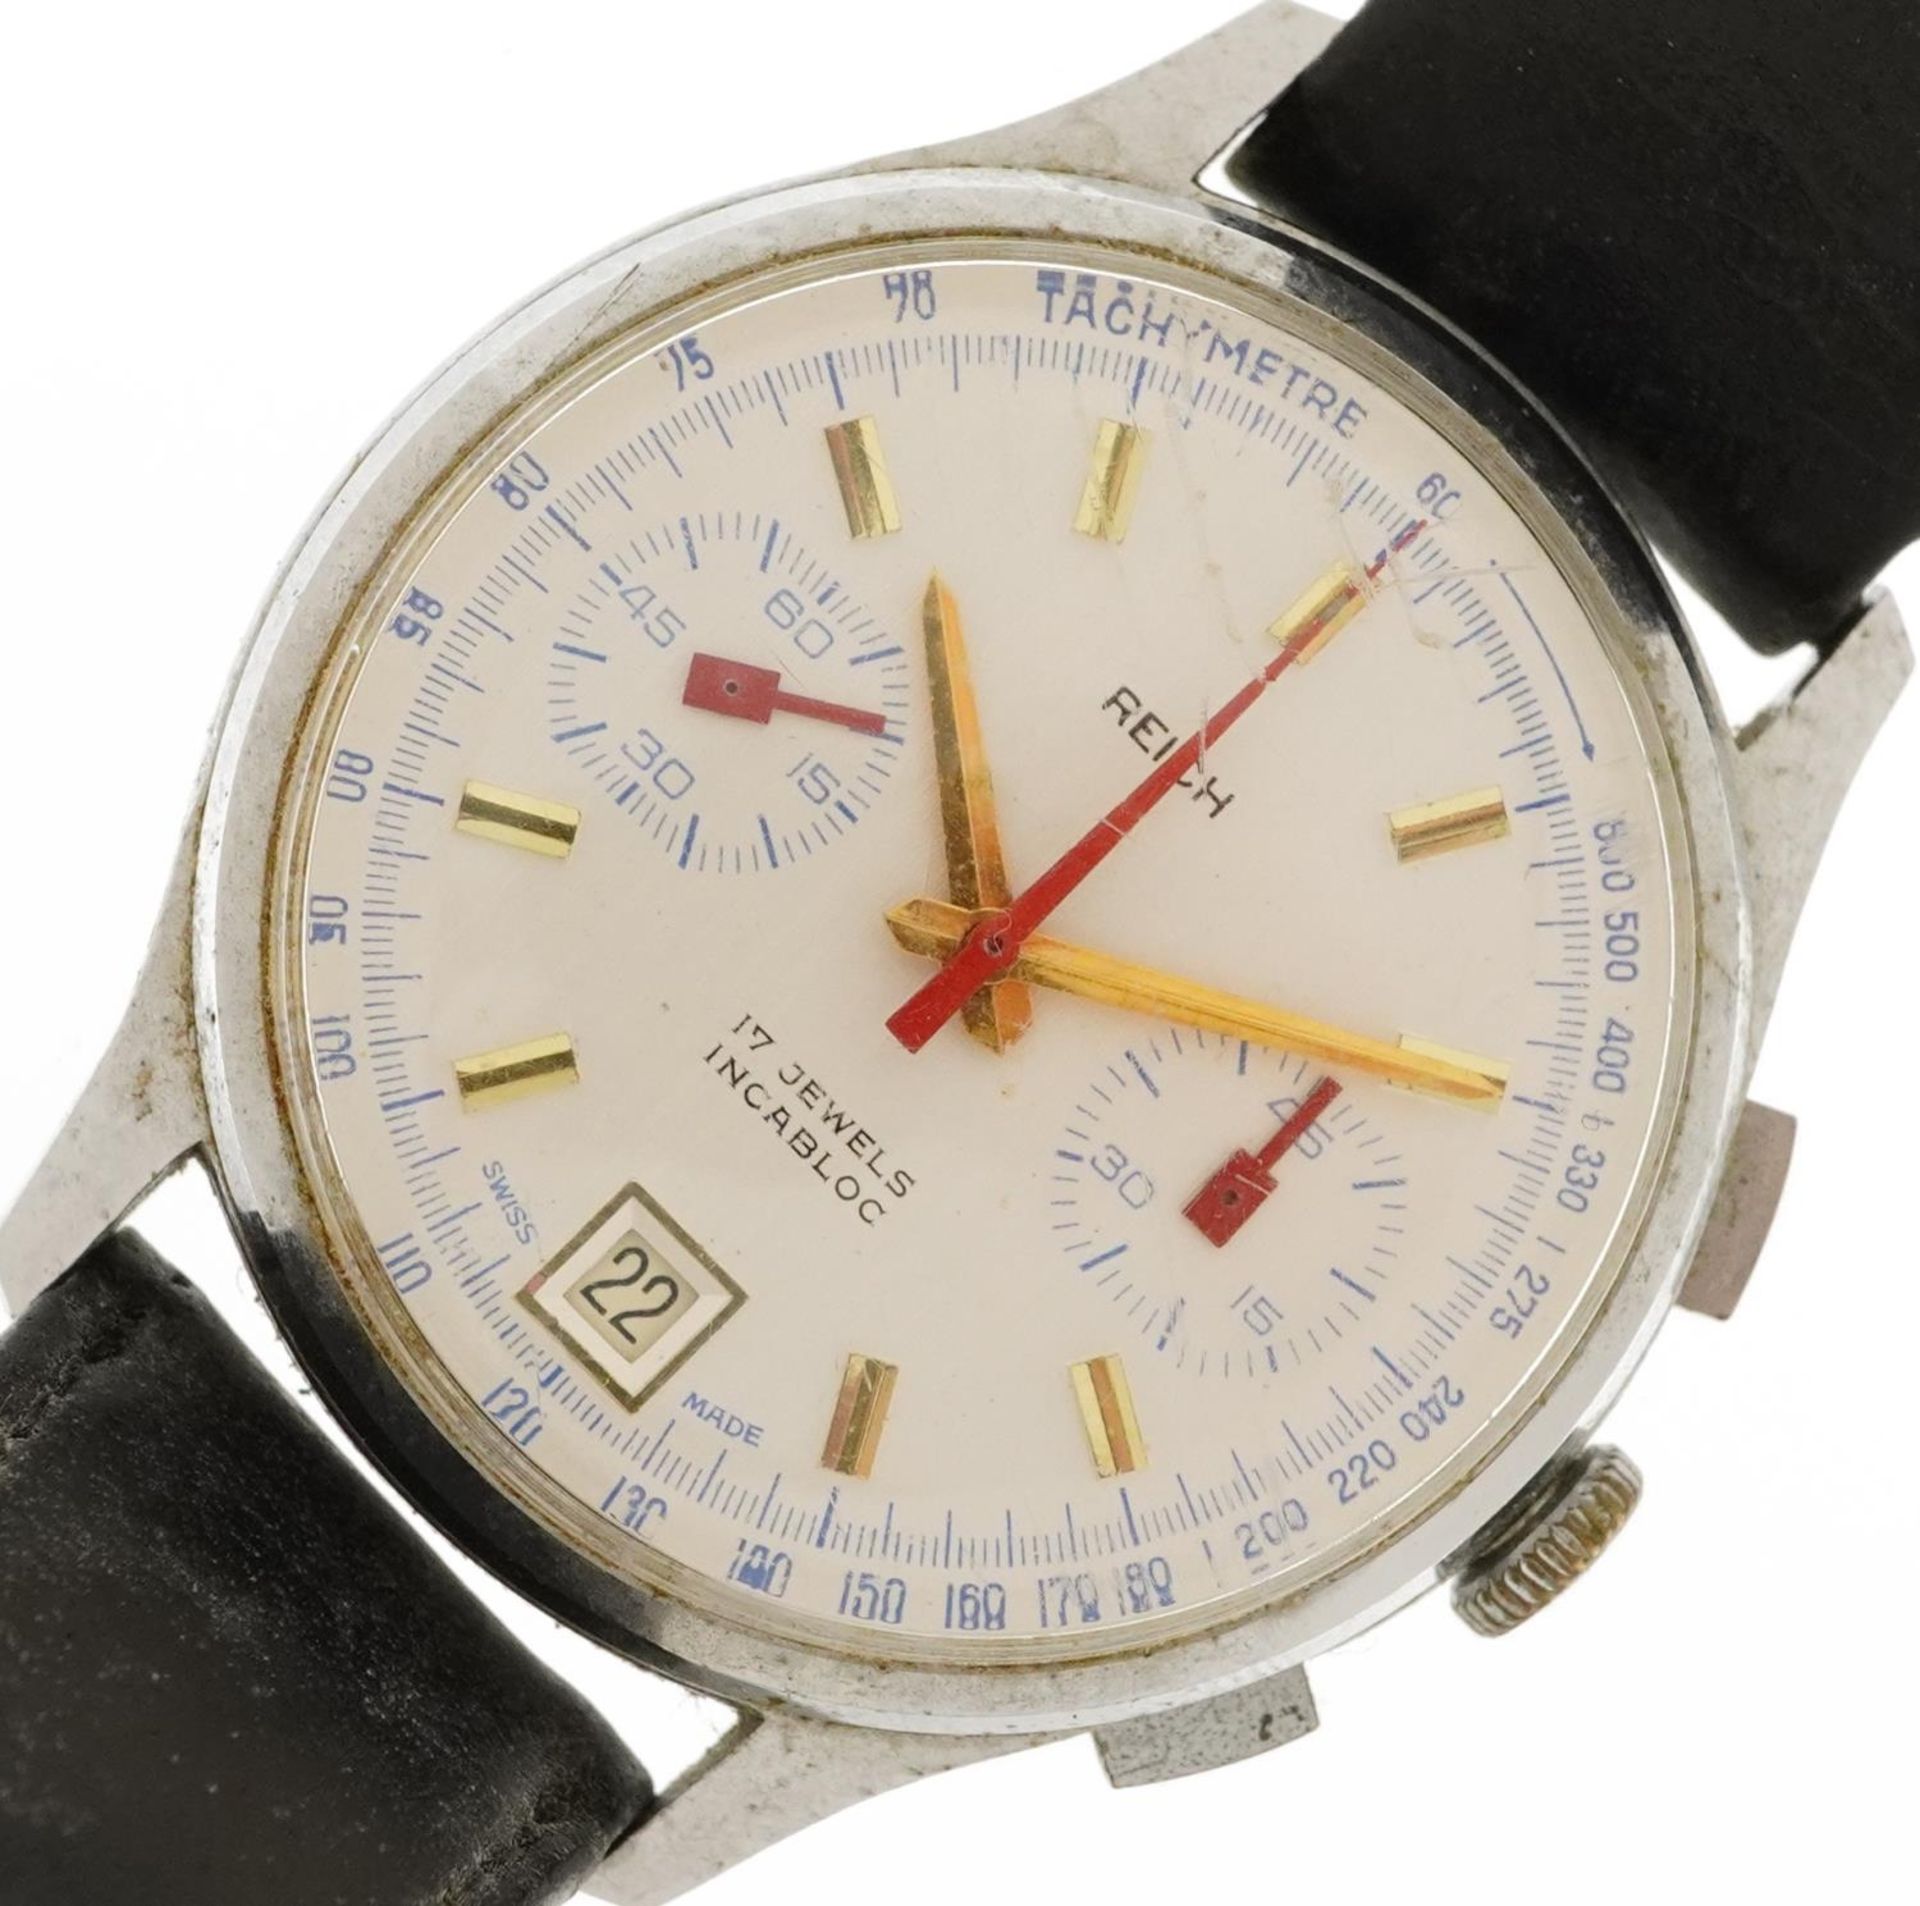 Reich, gentlemen's chronograph manual wristwatch with date aperture, the case numbered 661701, 35.5